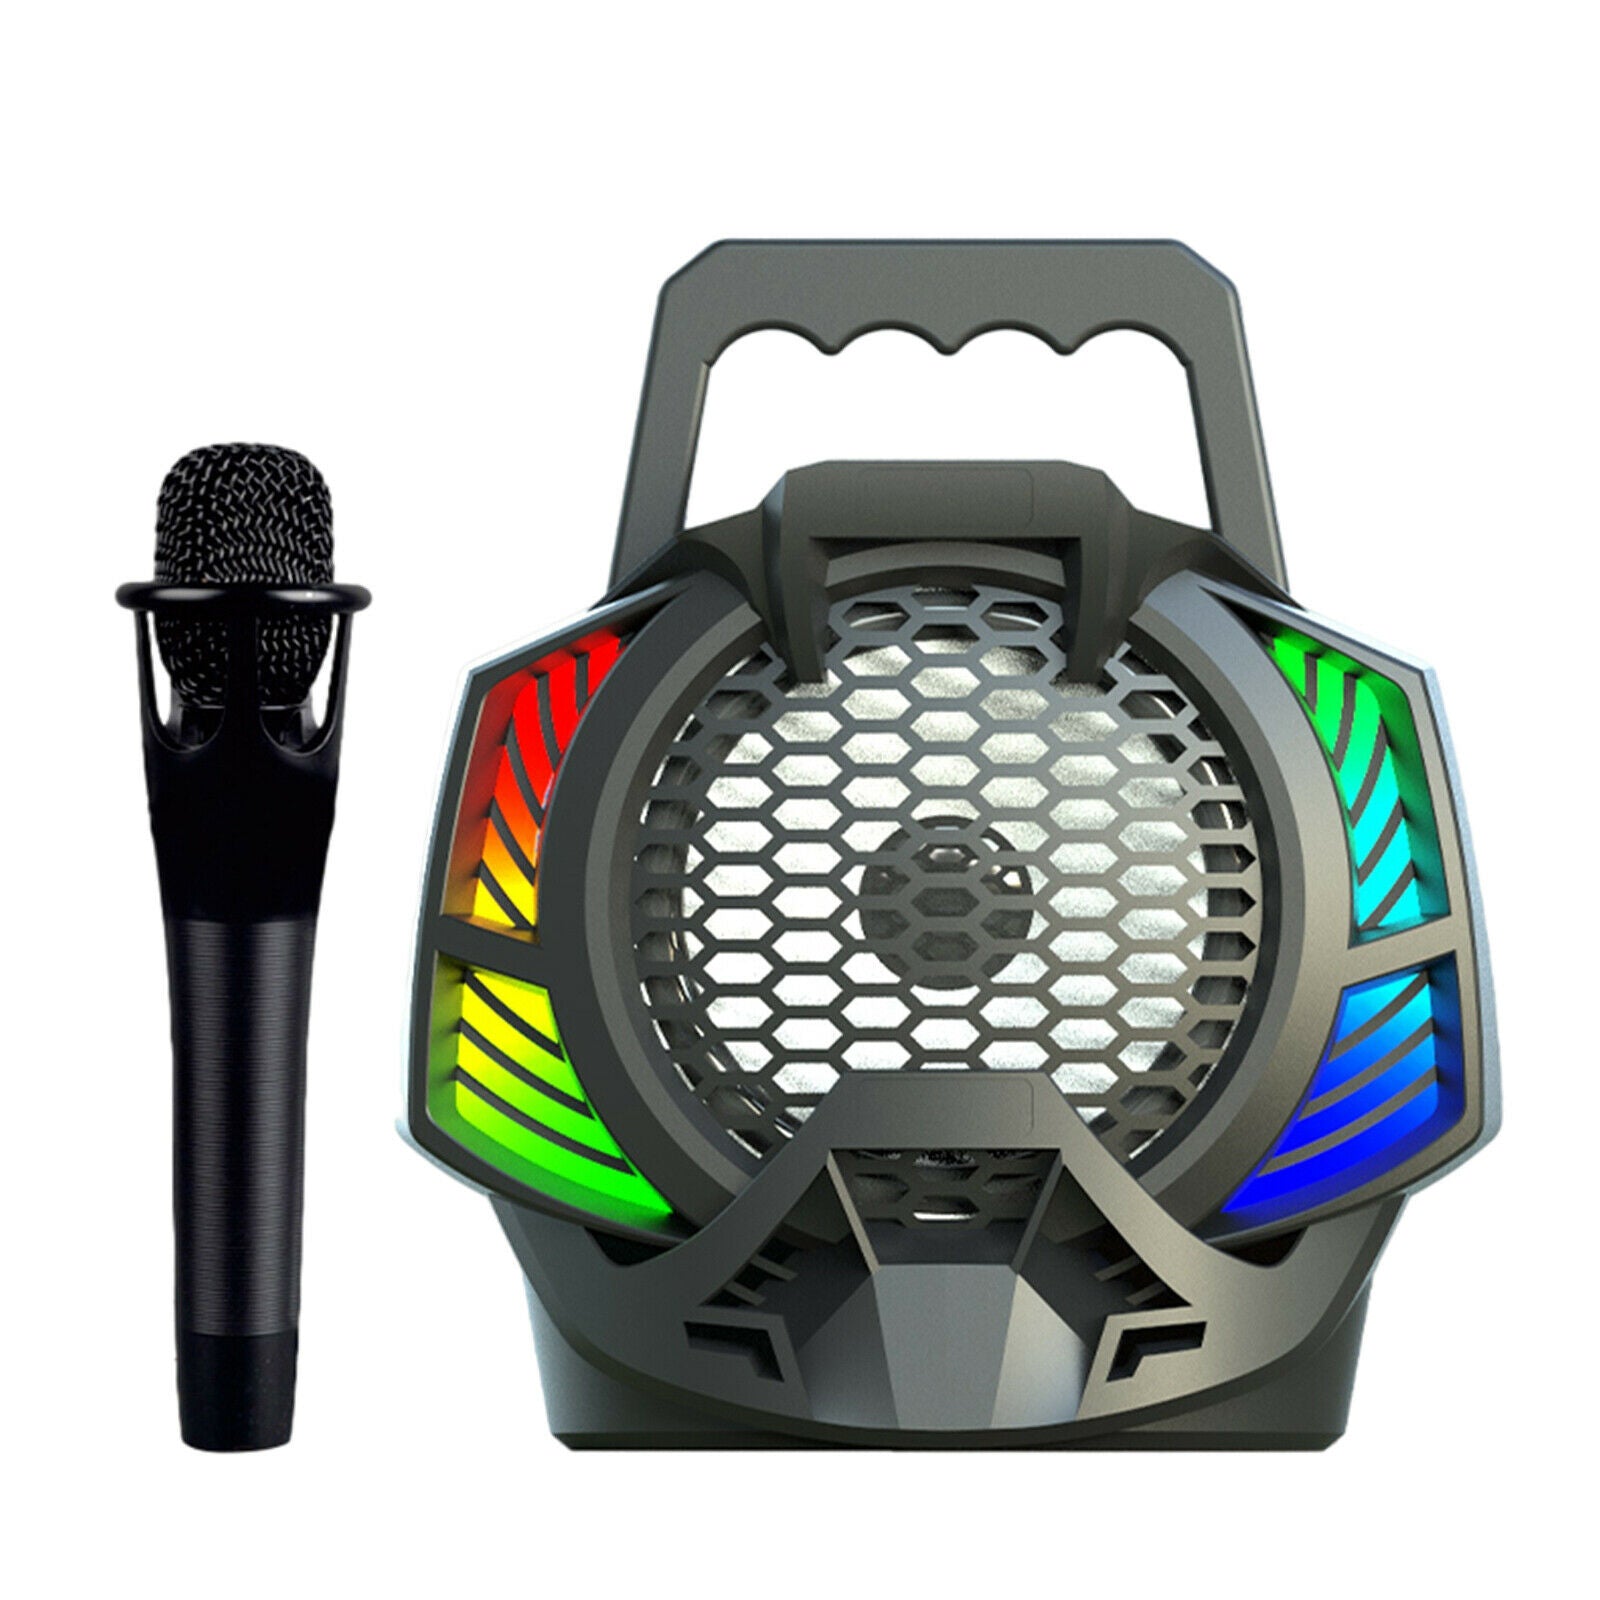 Portable Disco Bluetooth Speaker Rechargeable w/Microphone Support FM Radio